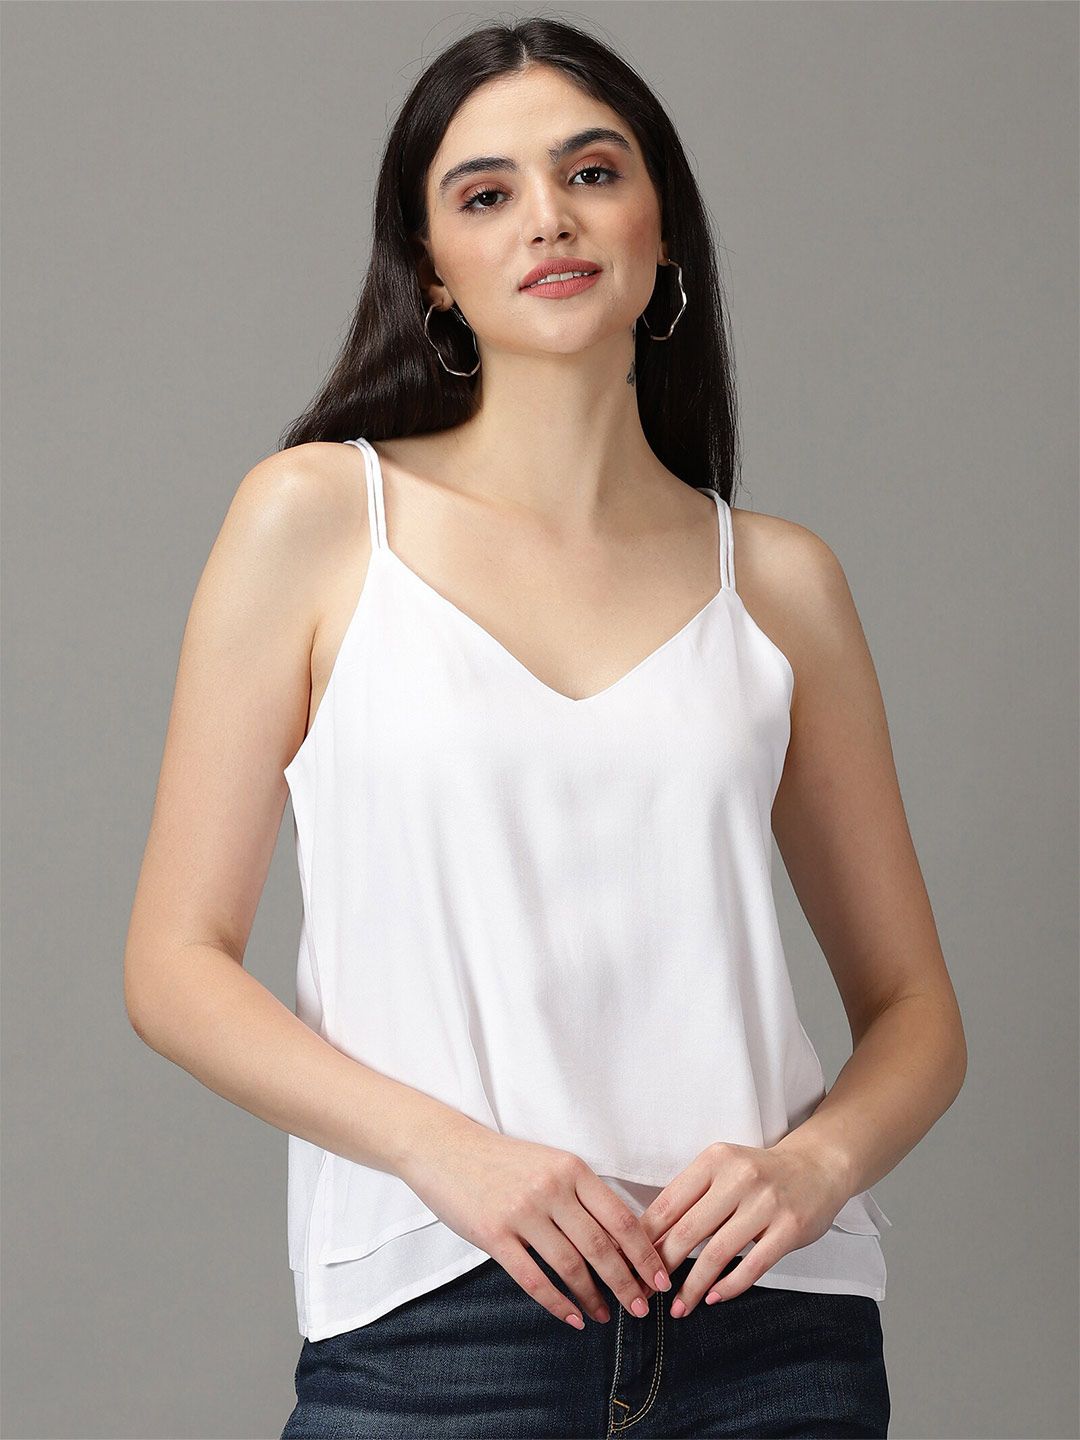 DIVINATION Camisole Style Layered Top Price in India